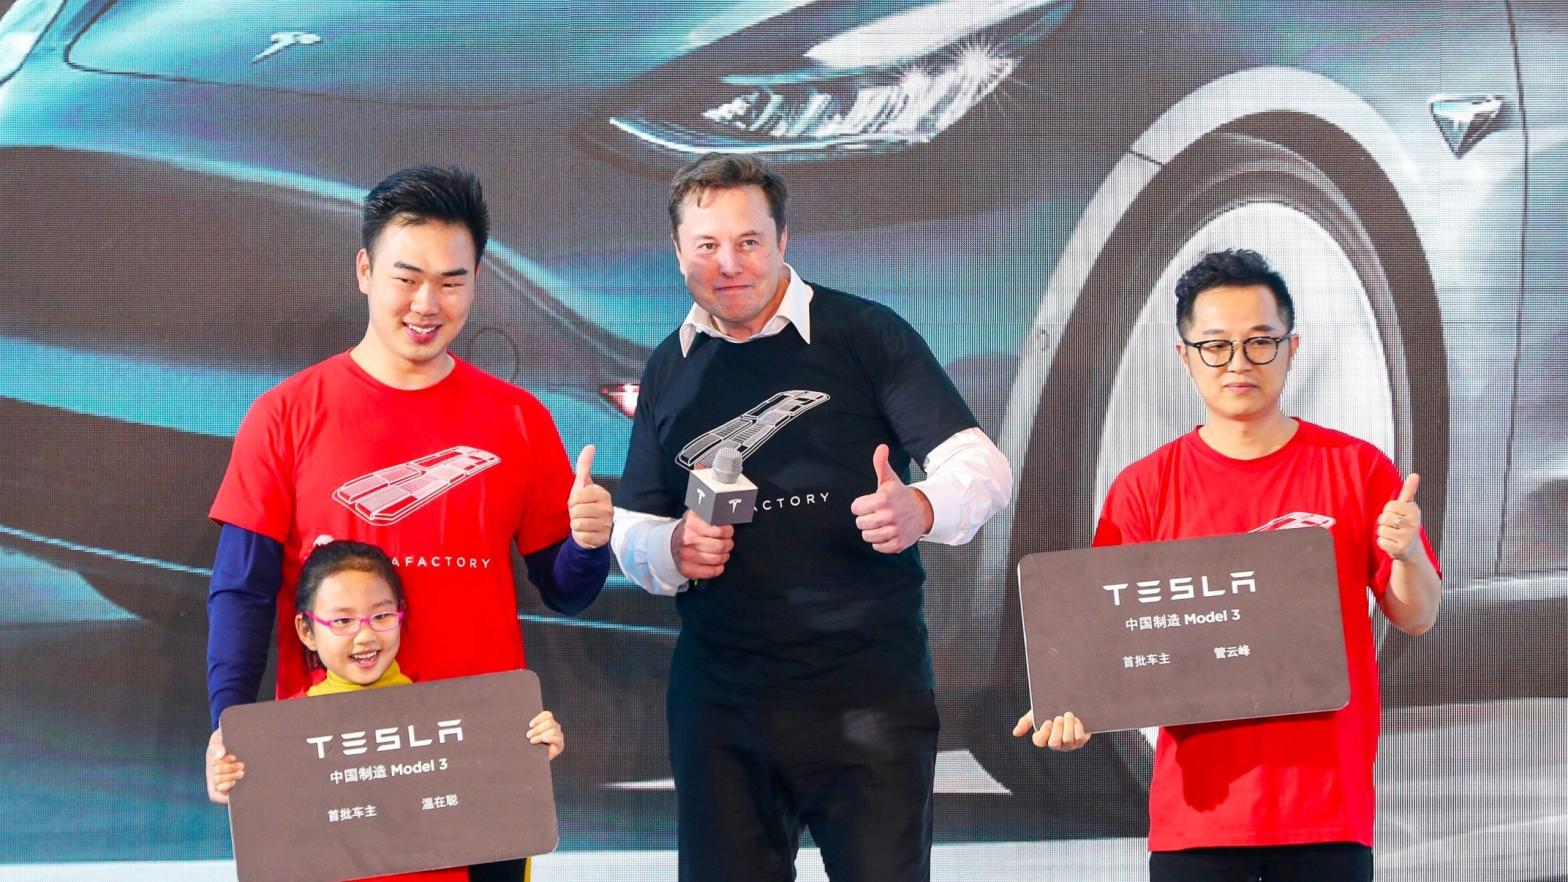 Elon Musk poses for photos with buyers during the Tesla China-made Model 3 Delivery Ceremony in Shanghai. (Photo: STR / AFP, Getty Images)